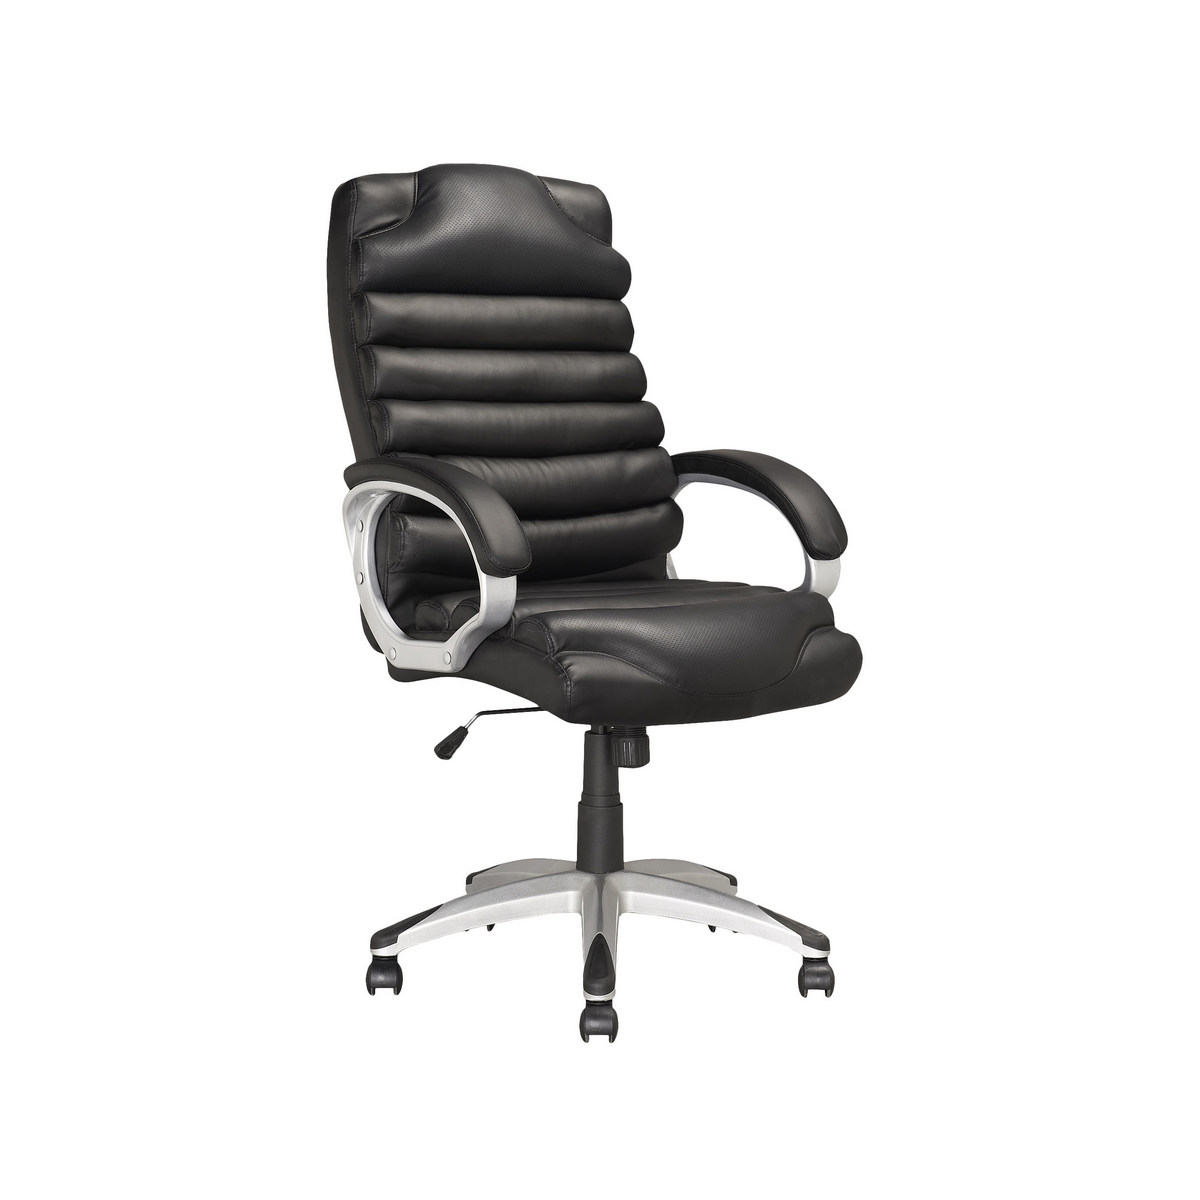 Corliving Lof-509-o Workspace Executive Office Chair In Black Leatherette